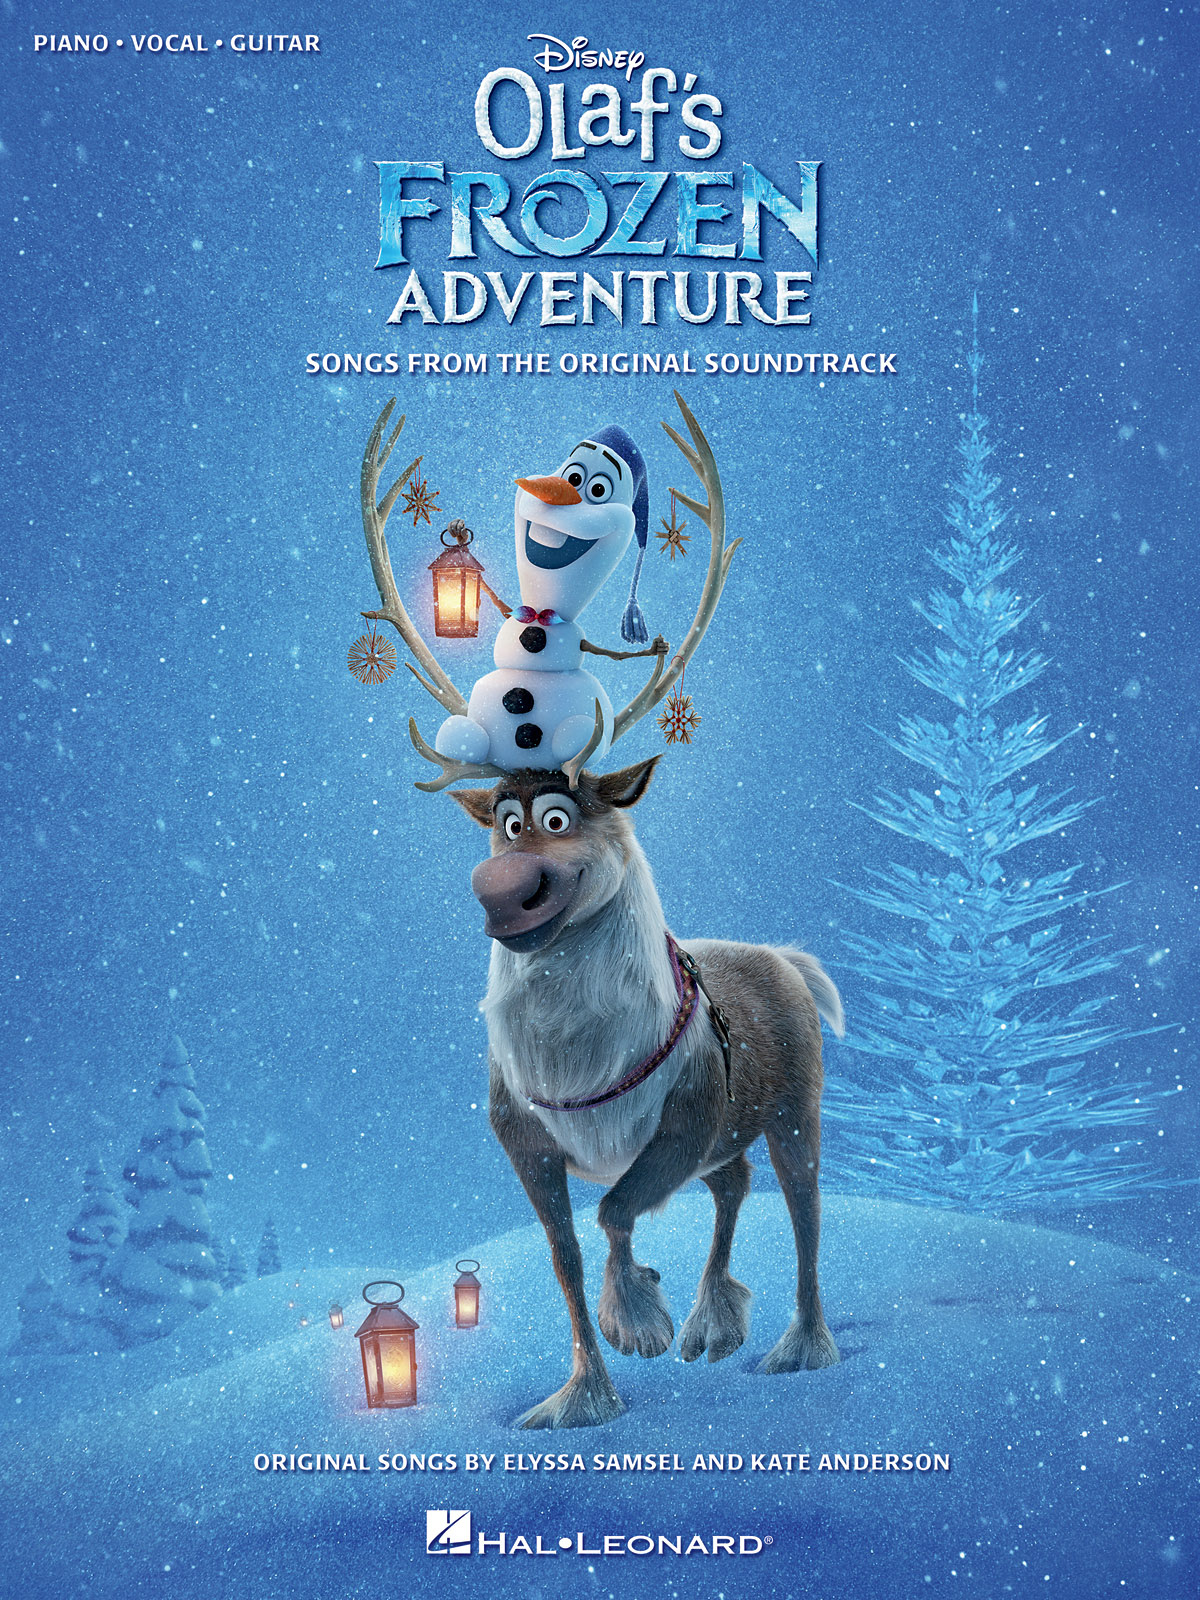 Disney's Olaf's Frozen Adventure - Songs from the Original Soundtrack